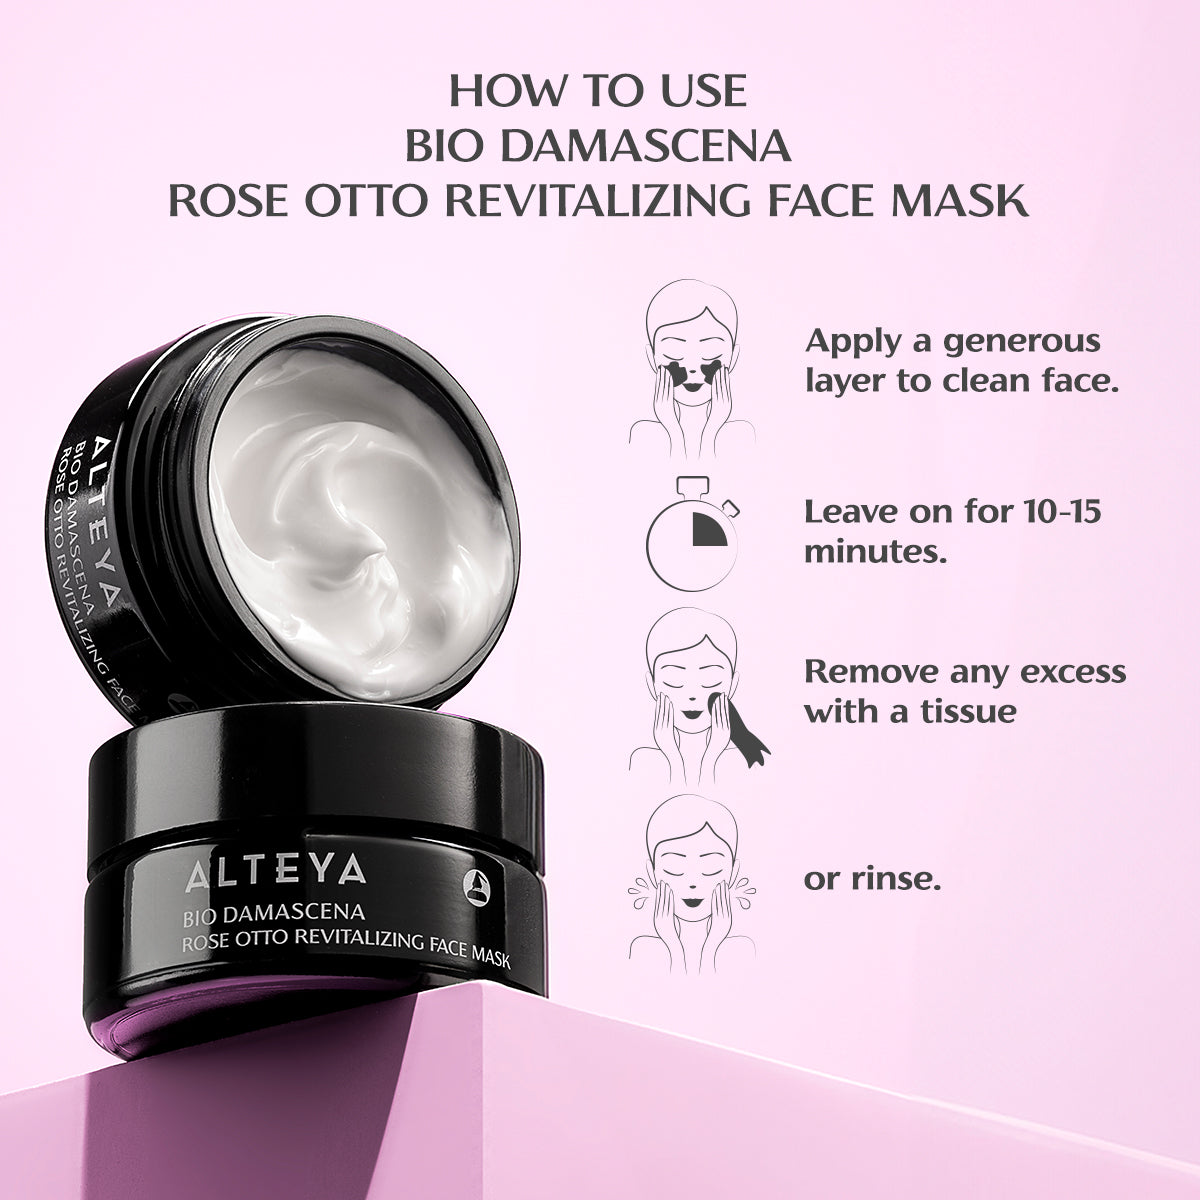 A skincare product advertisement showing an open jar of BIO DAMASCENA ROSE OTTO REVITALIZING FACE MASK with application instructions on a purple background.